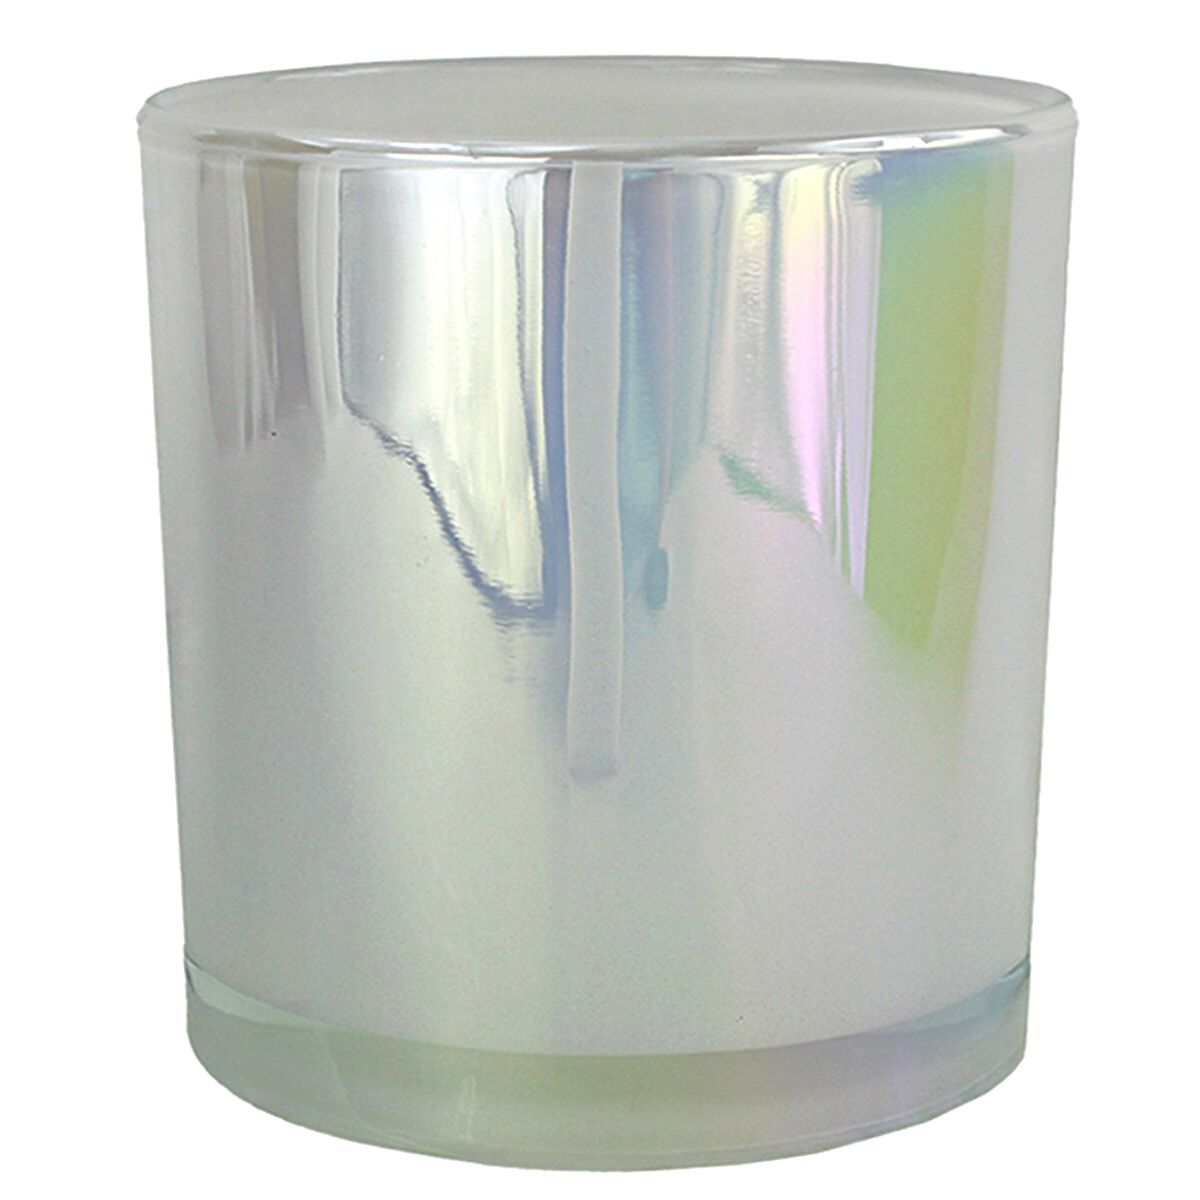 SYDNEY PEARL IRIDESCENT CANDLE VESSEL